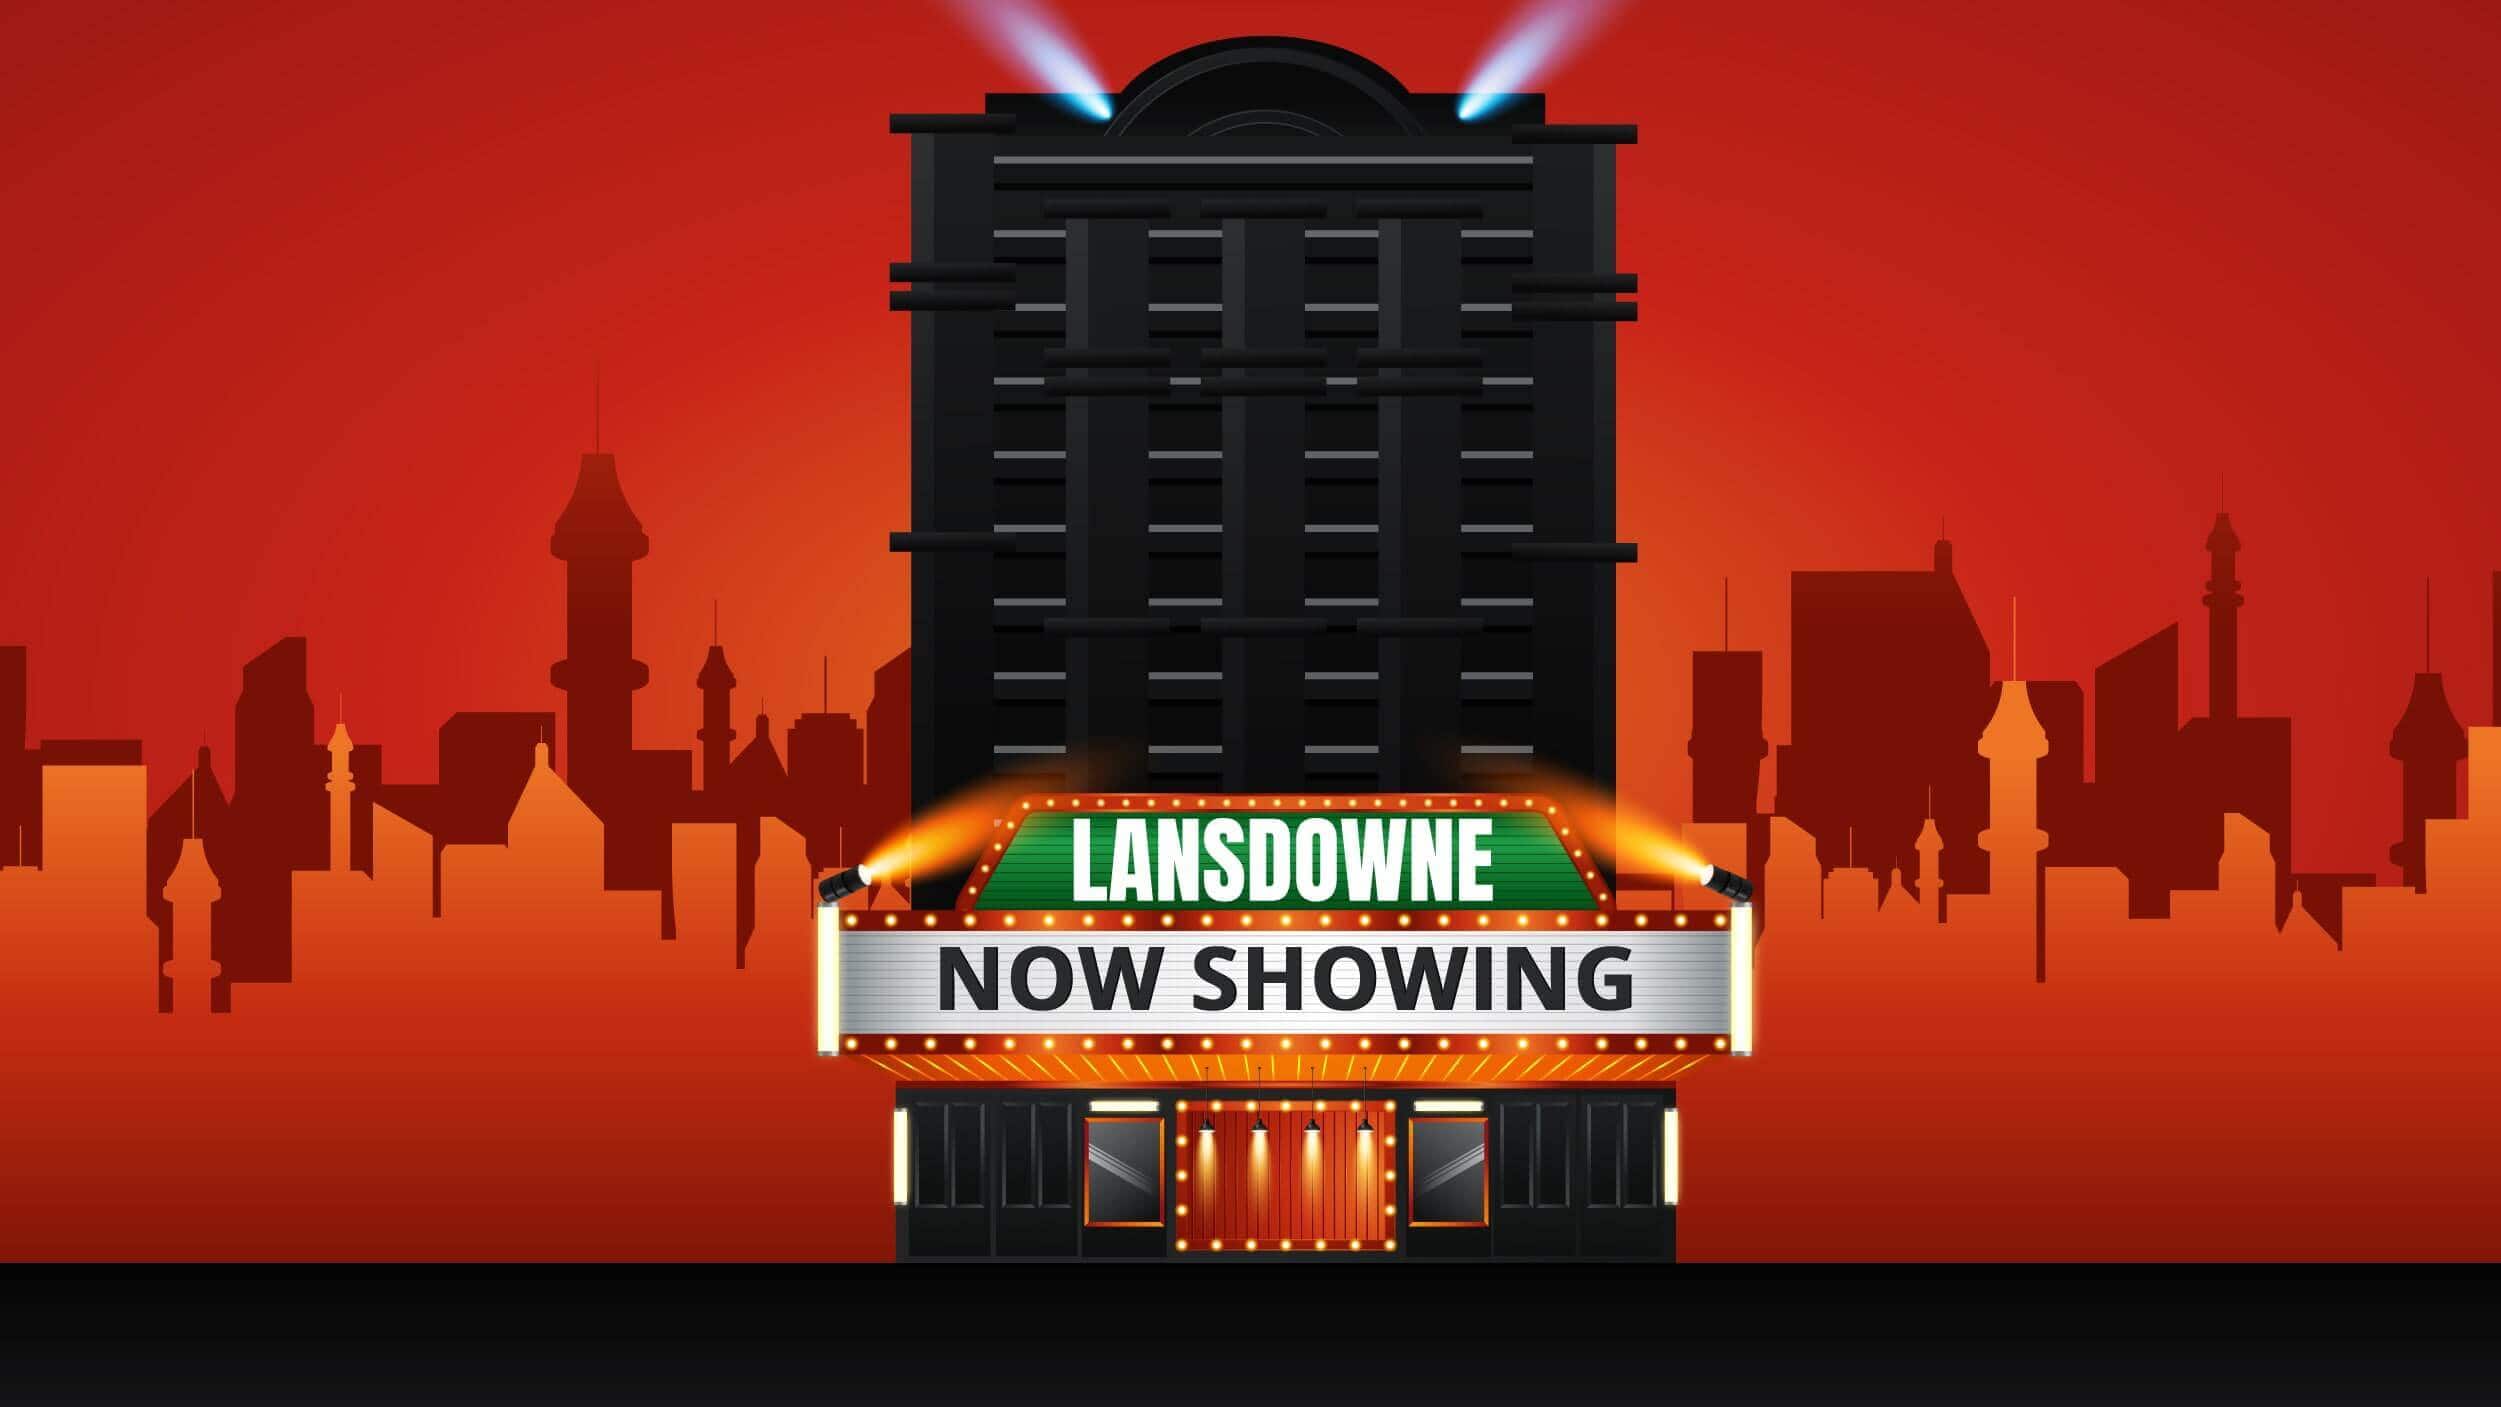 An illustration of a movie theater with a marquee that says Lansdowne Now Showing.